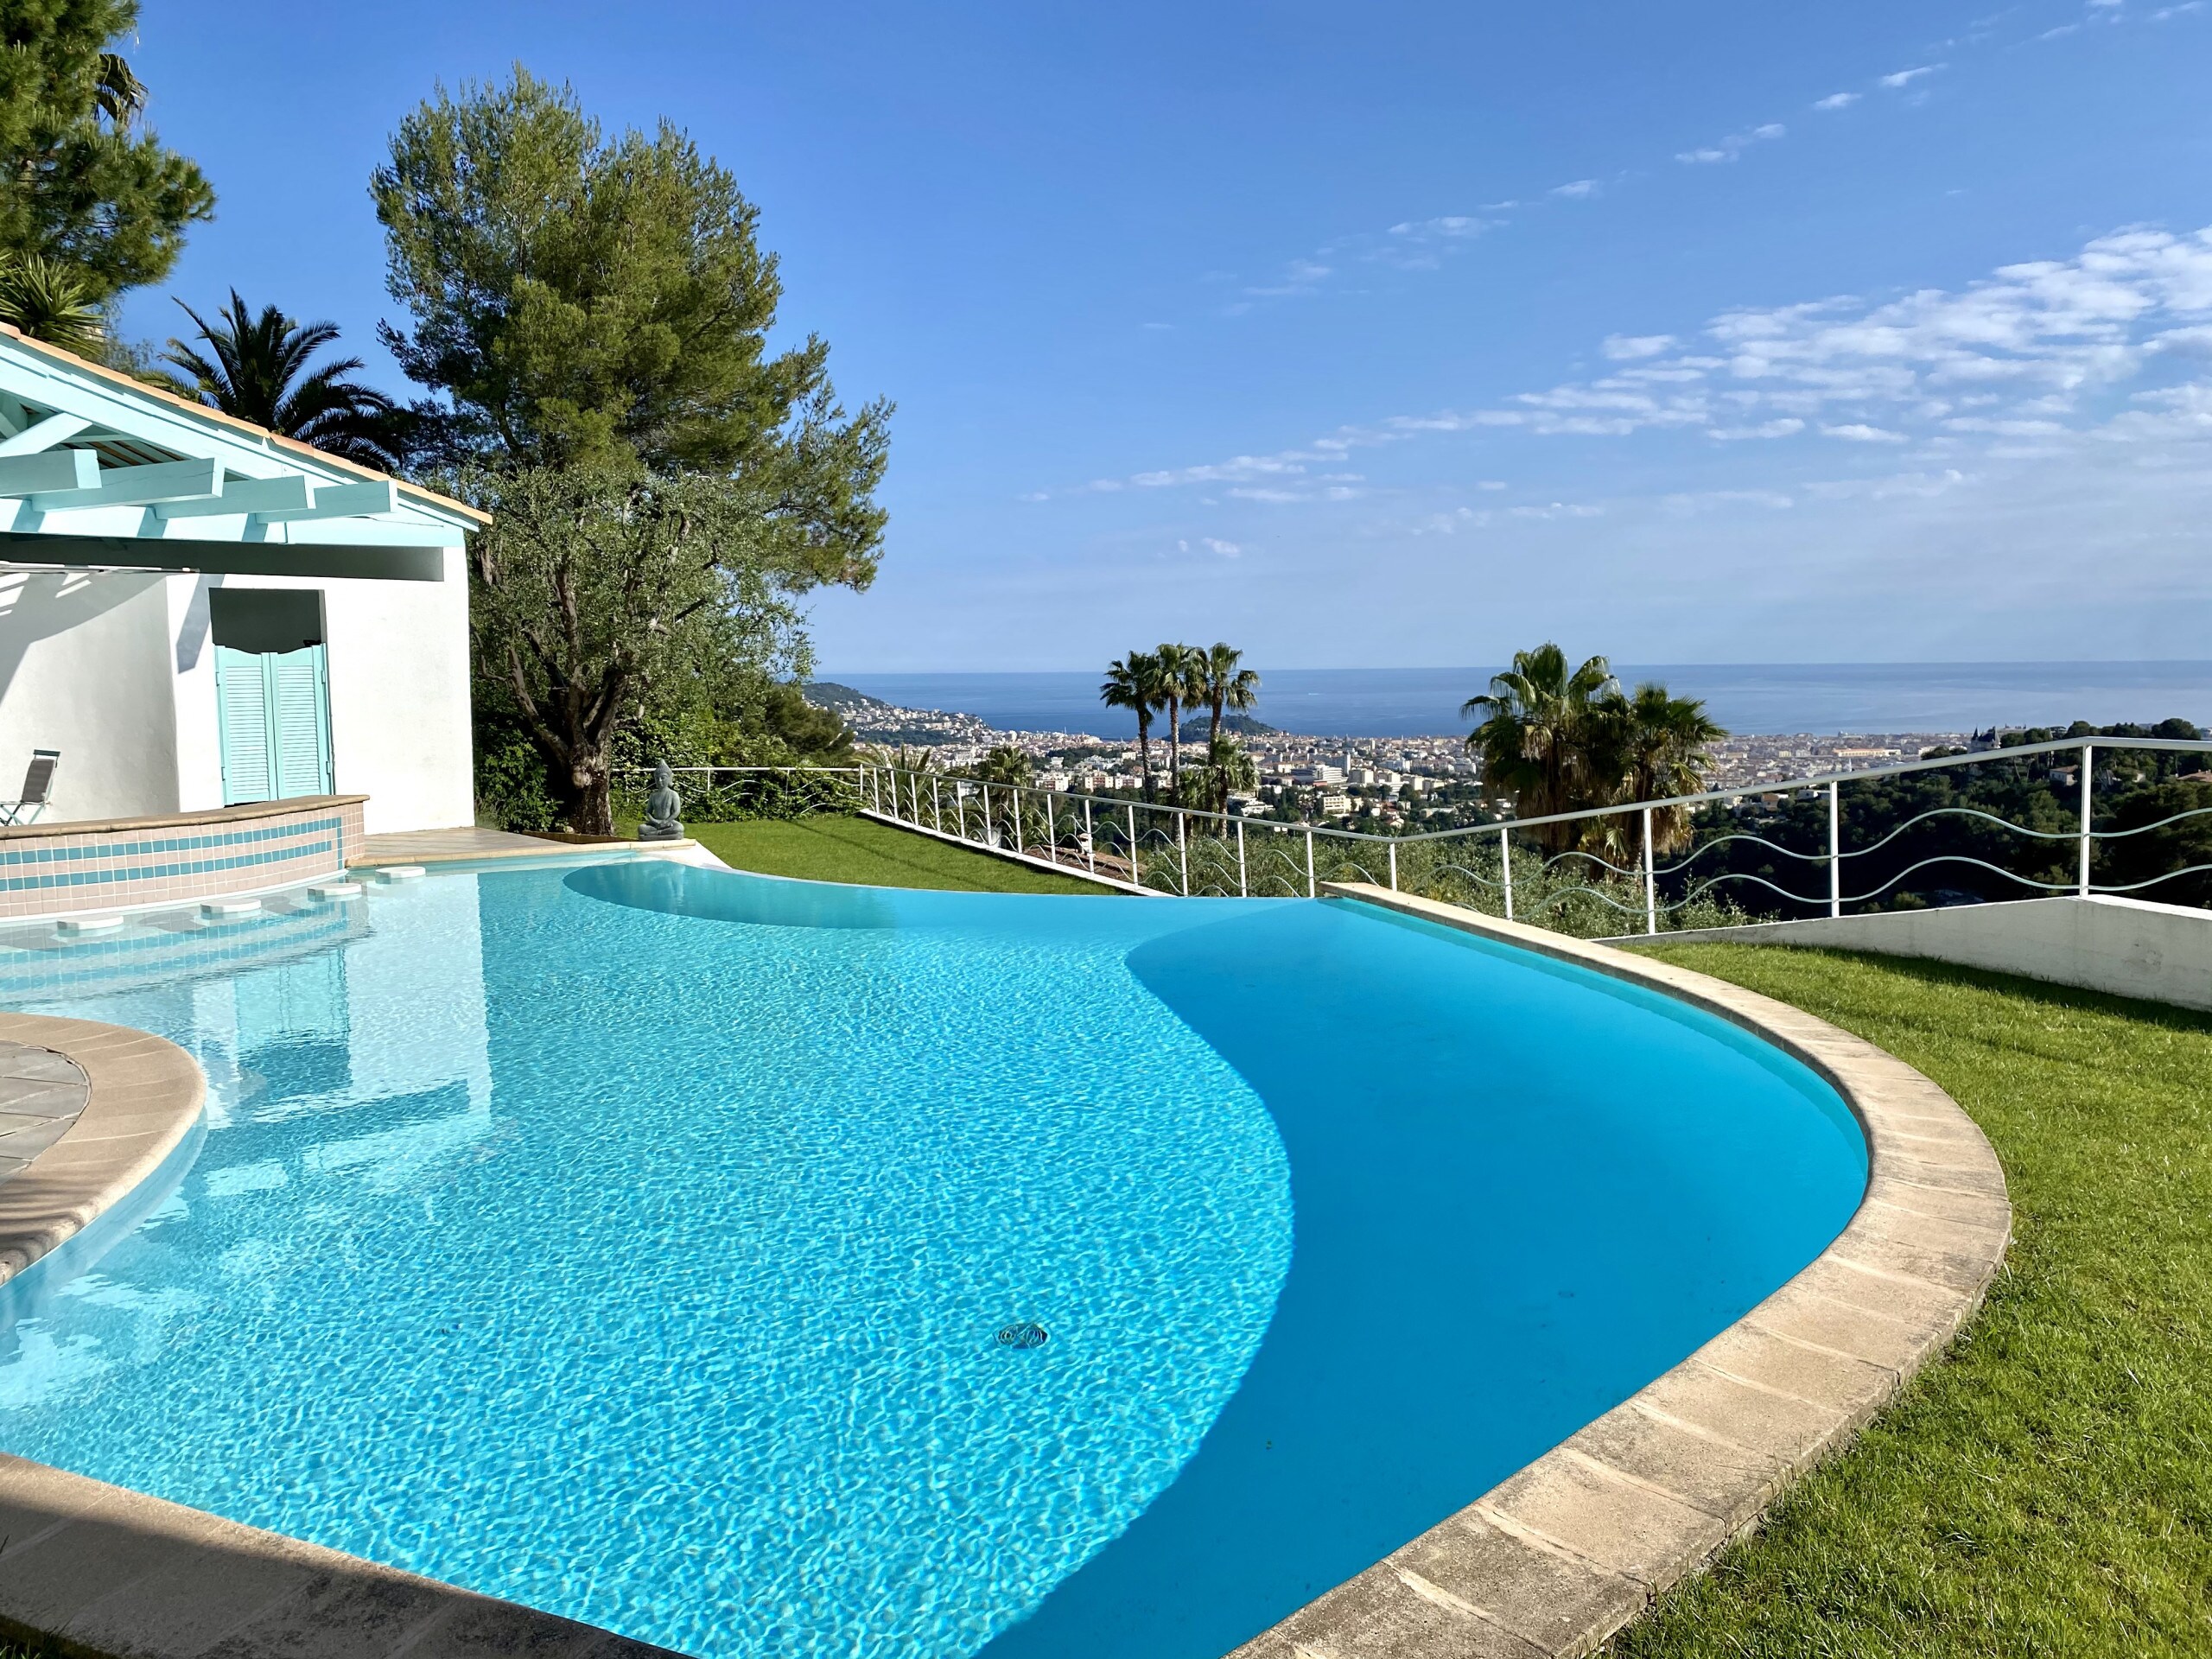 Swimming pool with sea view in Nice